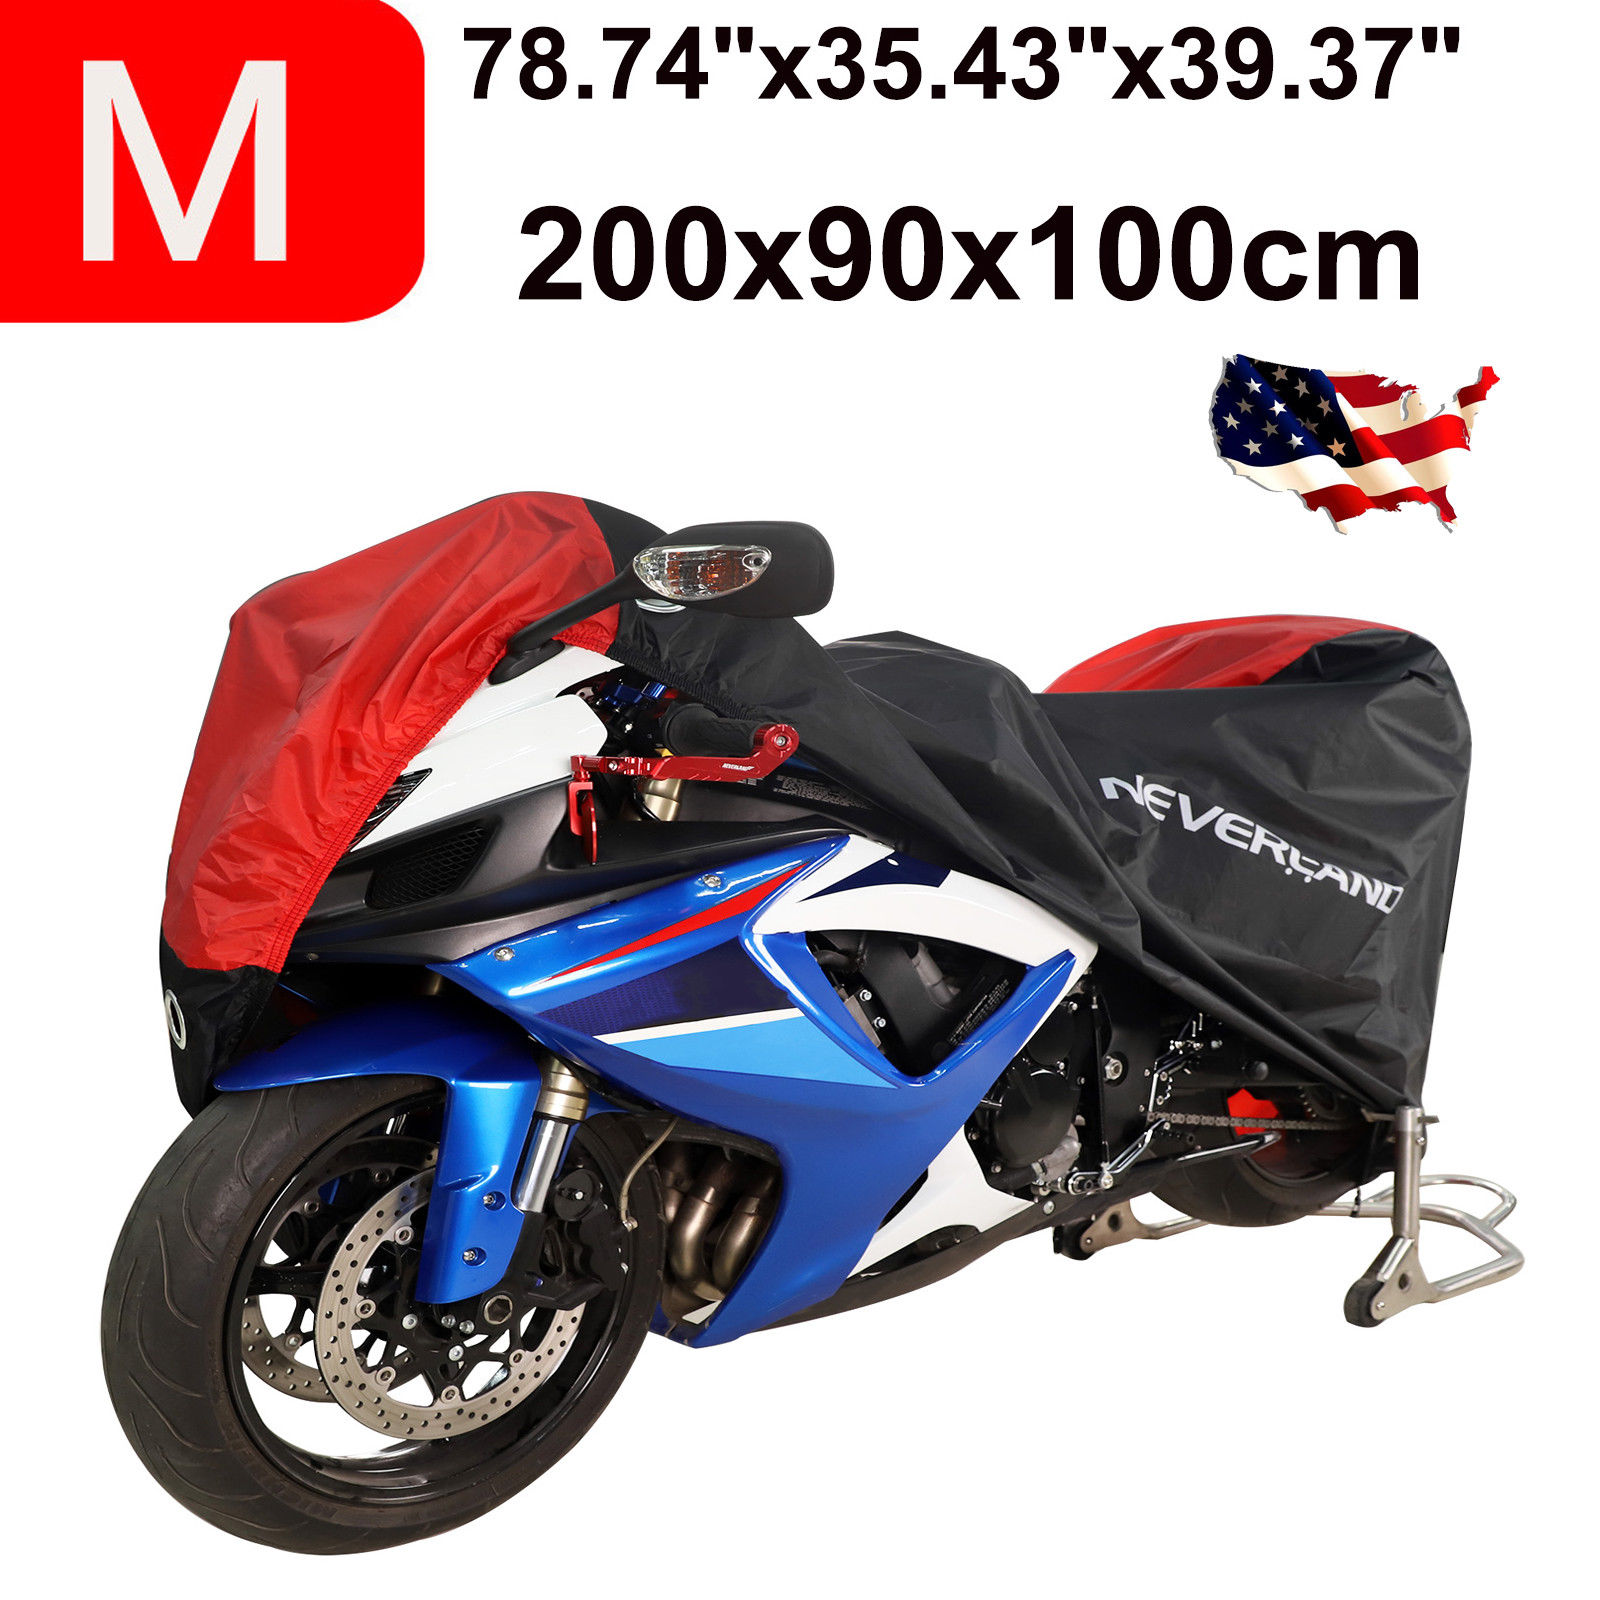 MOTORCYCLE COVER 100/% WATERPROOF FOR YAMAHA YZ 250 2T 1994